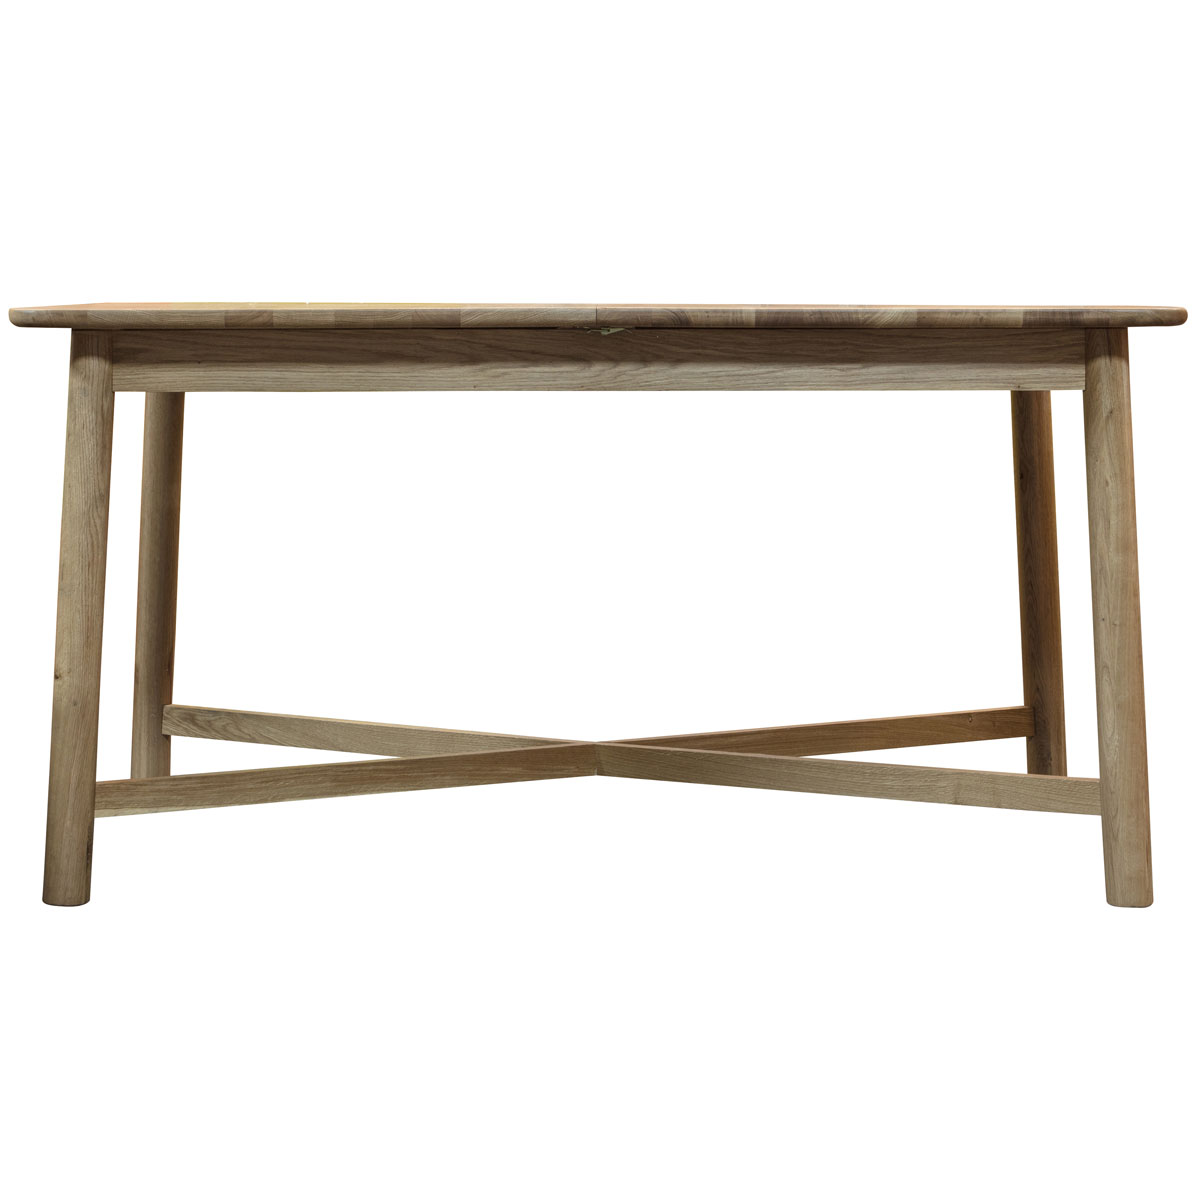 Kingham Ext Dining Table 1500/2000x950x750mm